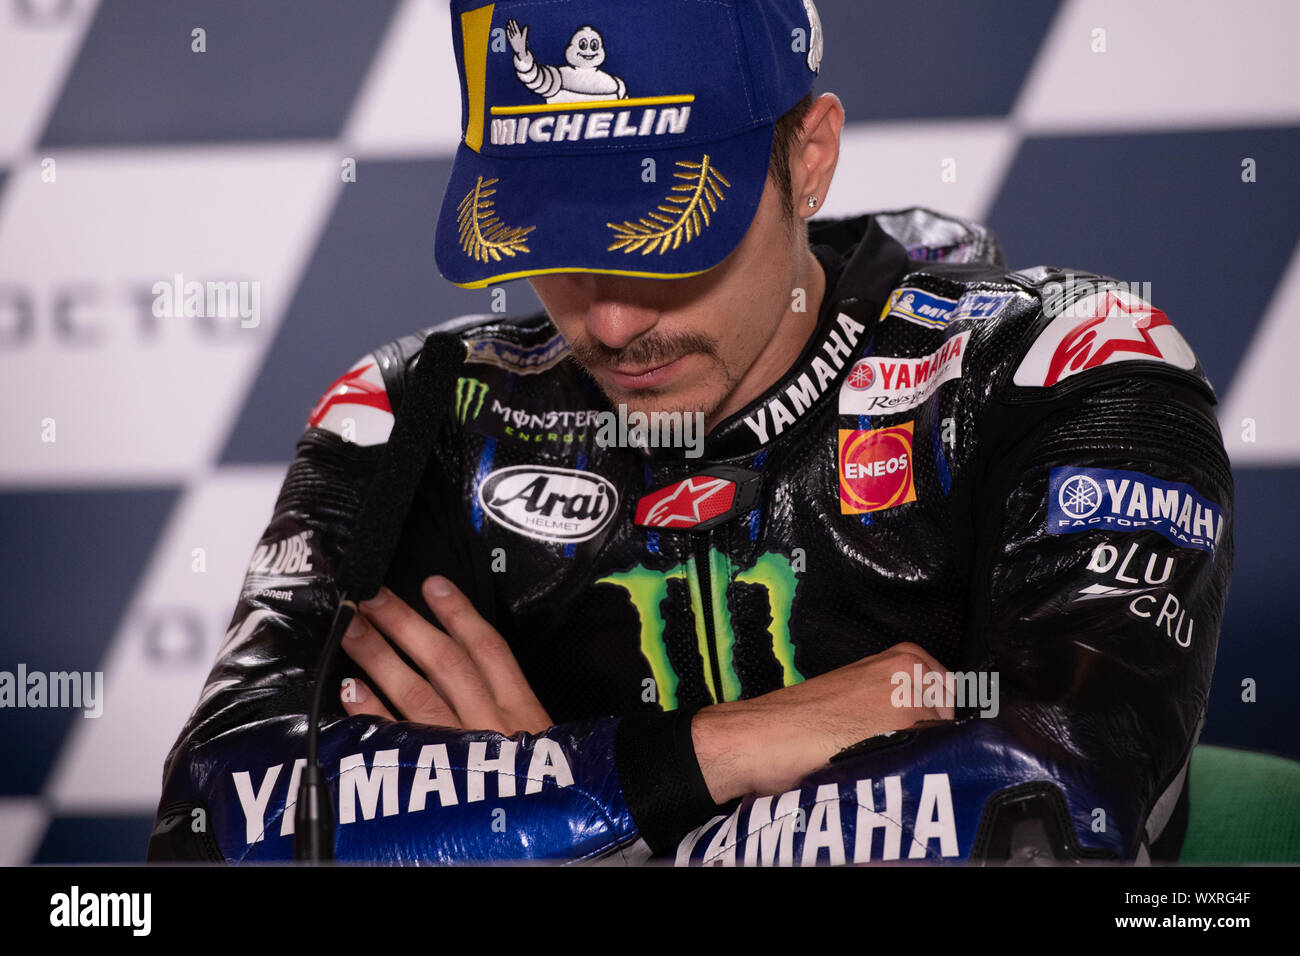 MAVERICK VINALES, SPANISH RIDER NUMBER 12 FOR YAMAHA MONSTER TEAM IN MOTOGP  during Thursday And Sunday Press Conference Of The Motogp Of San Marino A Stock Photo